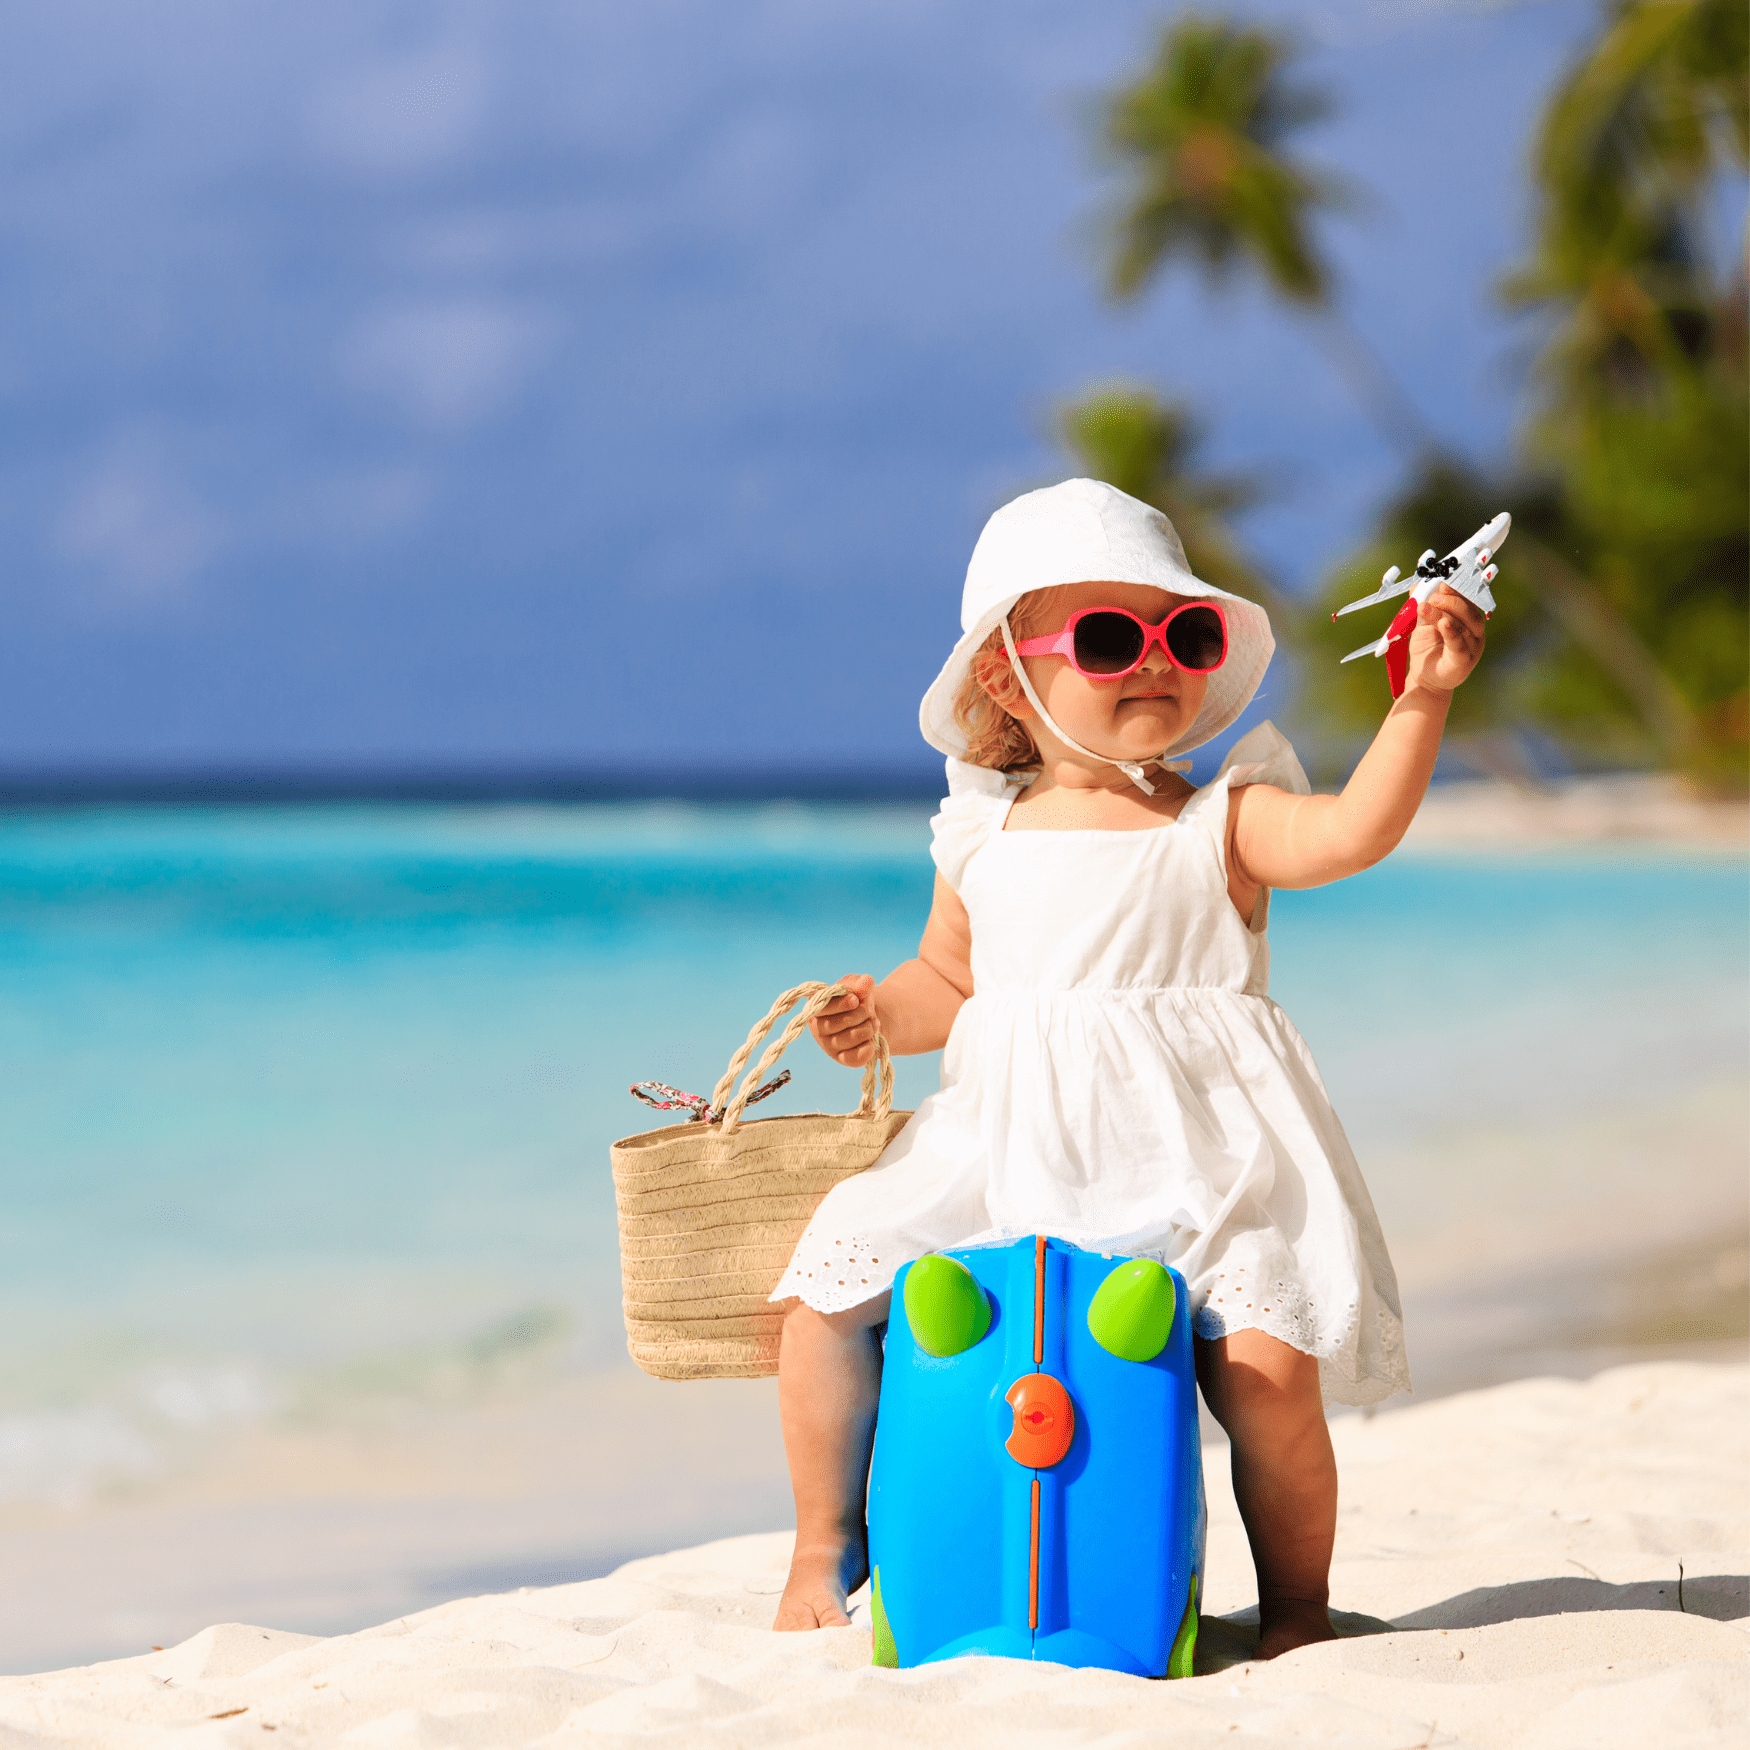 A baby sits on a suitcase on the beach, holding a bag in one hand and a toy airplane in the other.